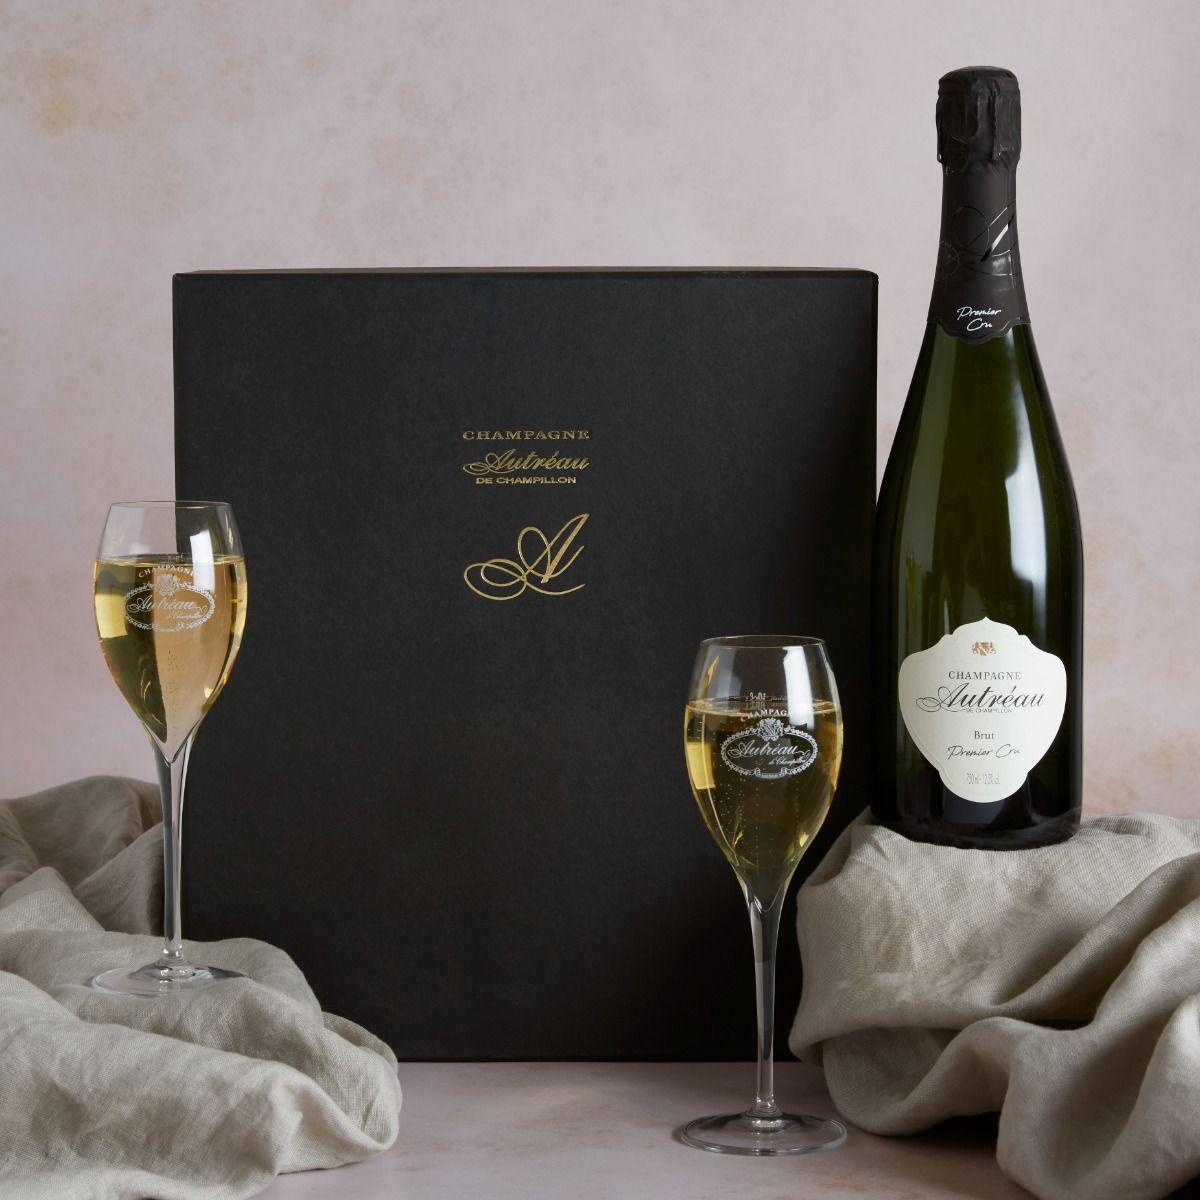 Champagne and glasses gift box from hampers.com with special black gift box